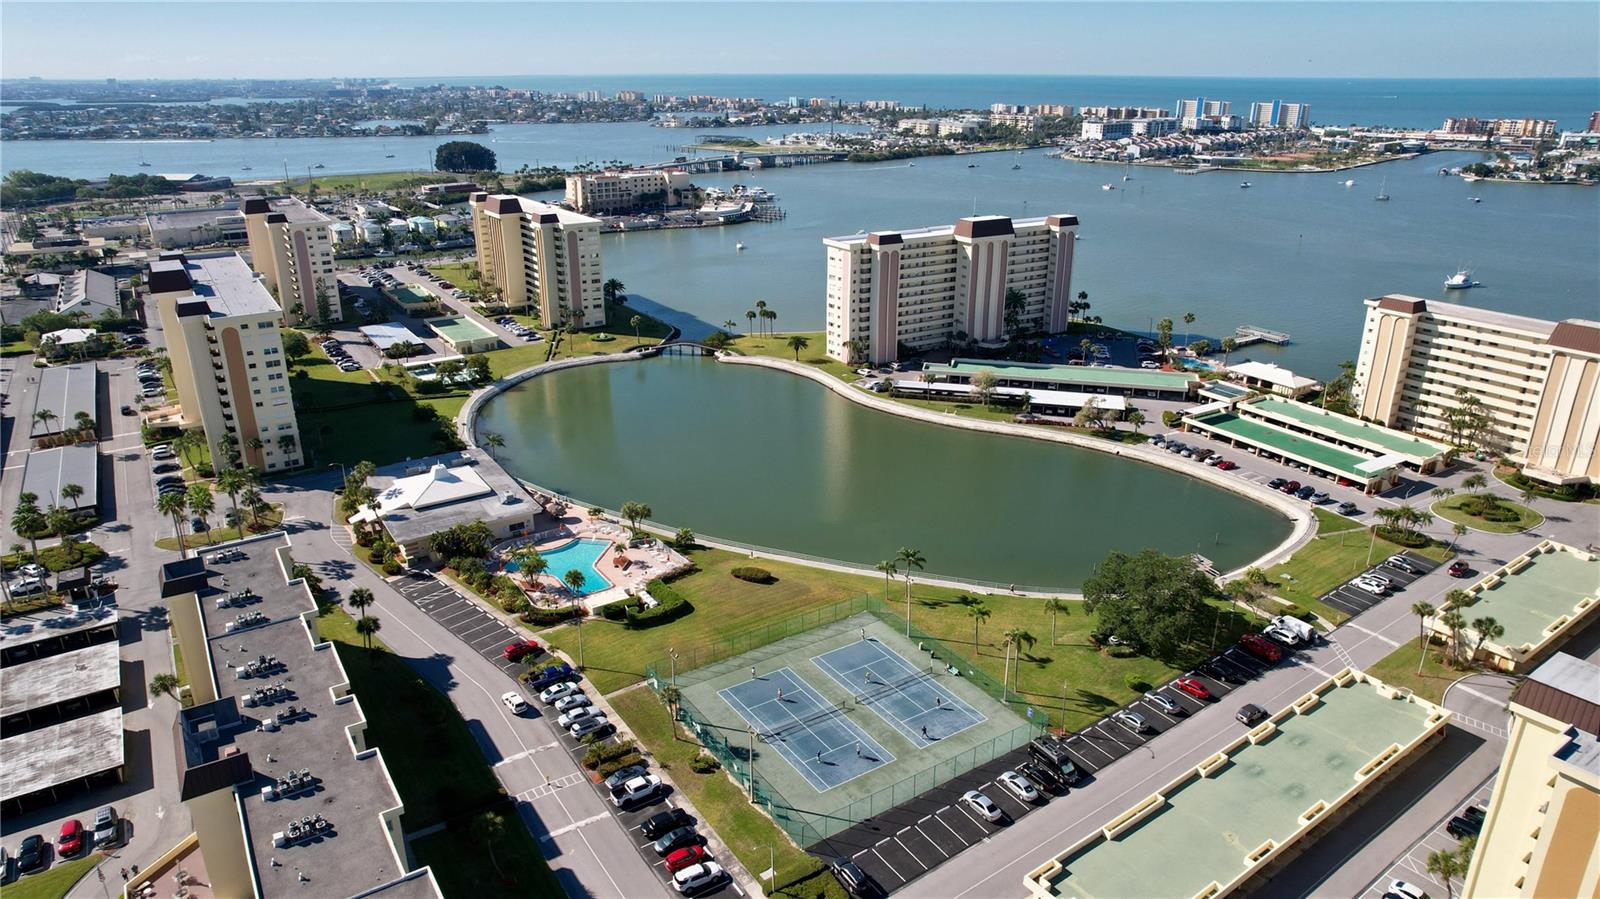 Sea Towers is an oasis community located on the intracoastal waters off of Madeira Beach.